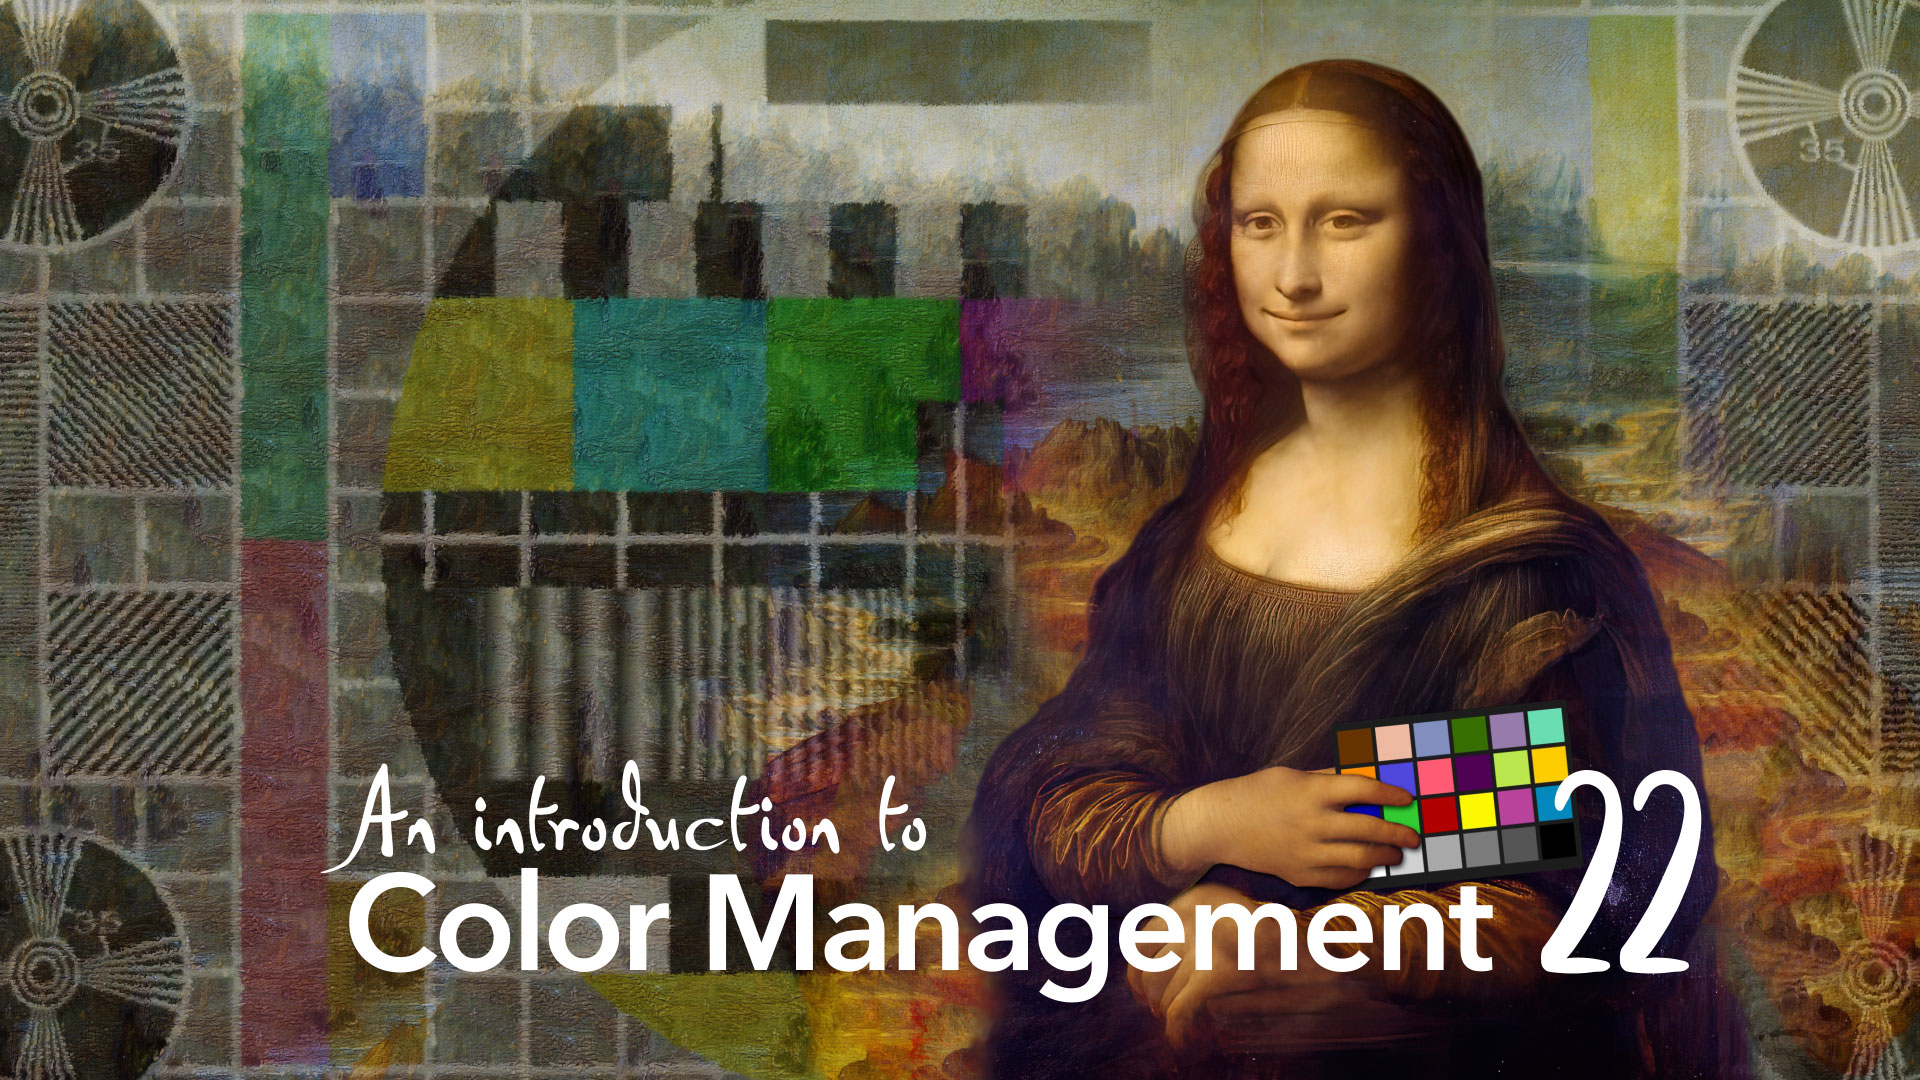 Color Management Part 22: Introducing Tone Mapping 8